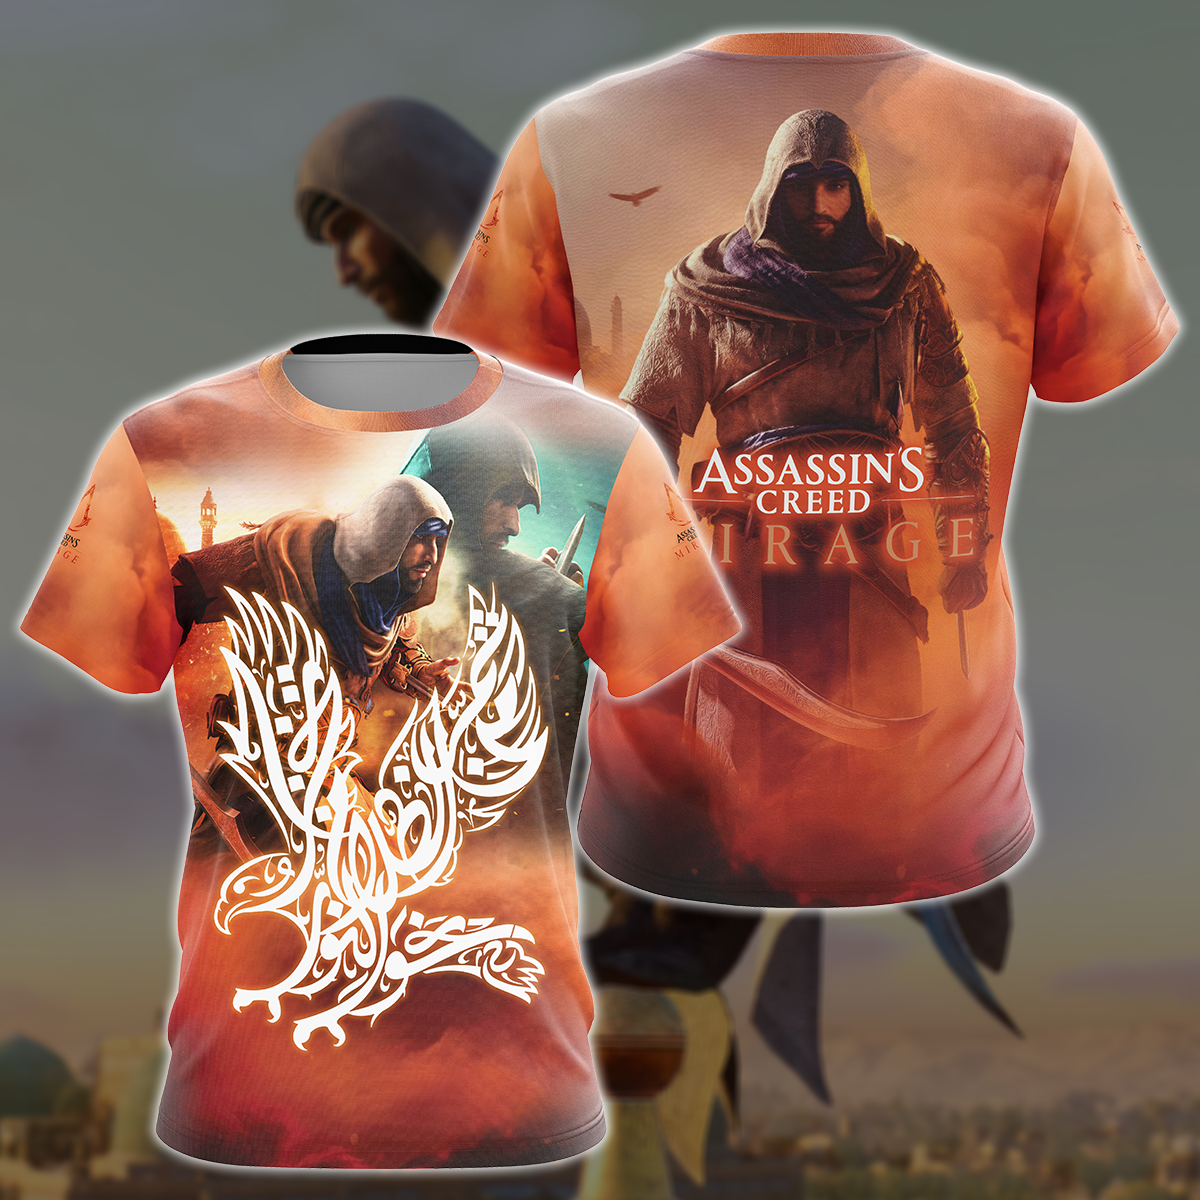 Assassin's Creed Mirage Video Game All Over Printed T-shirt Tank Top Zip Hoodie Pullover Hoodie Hawaiian Shirt Beach Shorts Joggers T-shirt S 